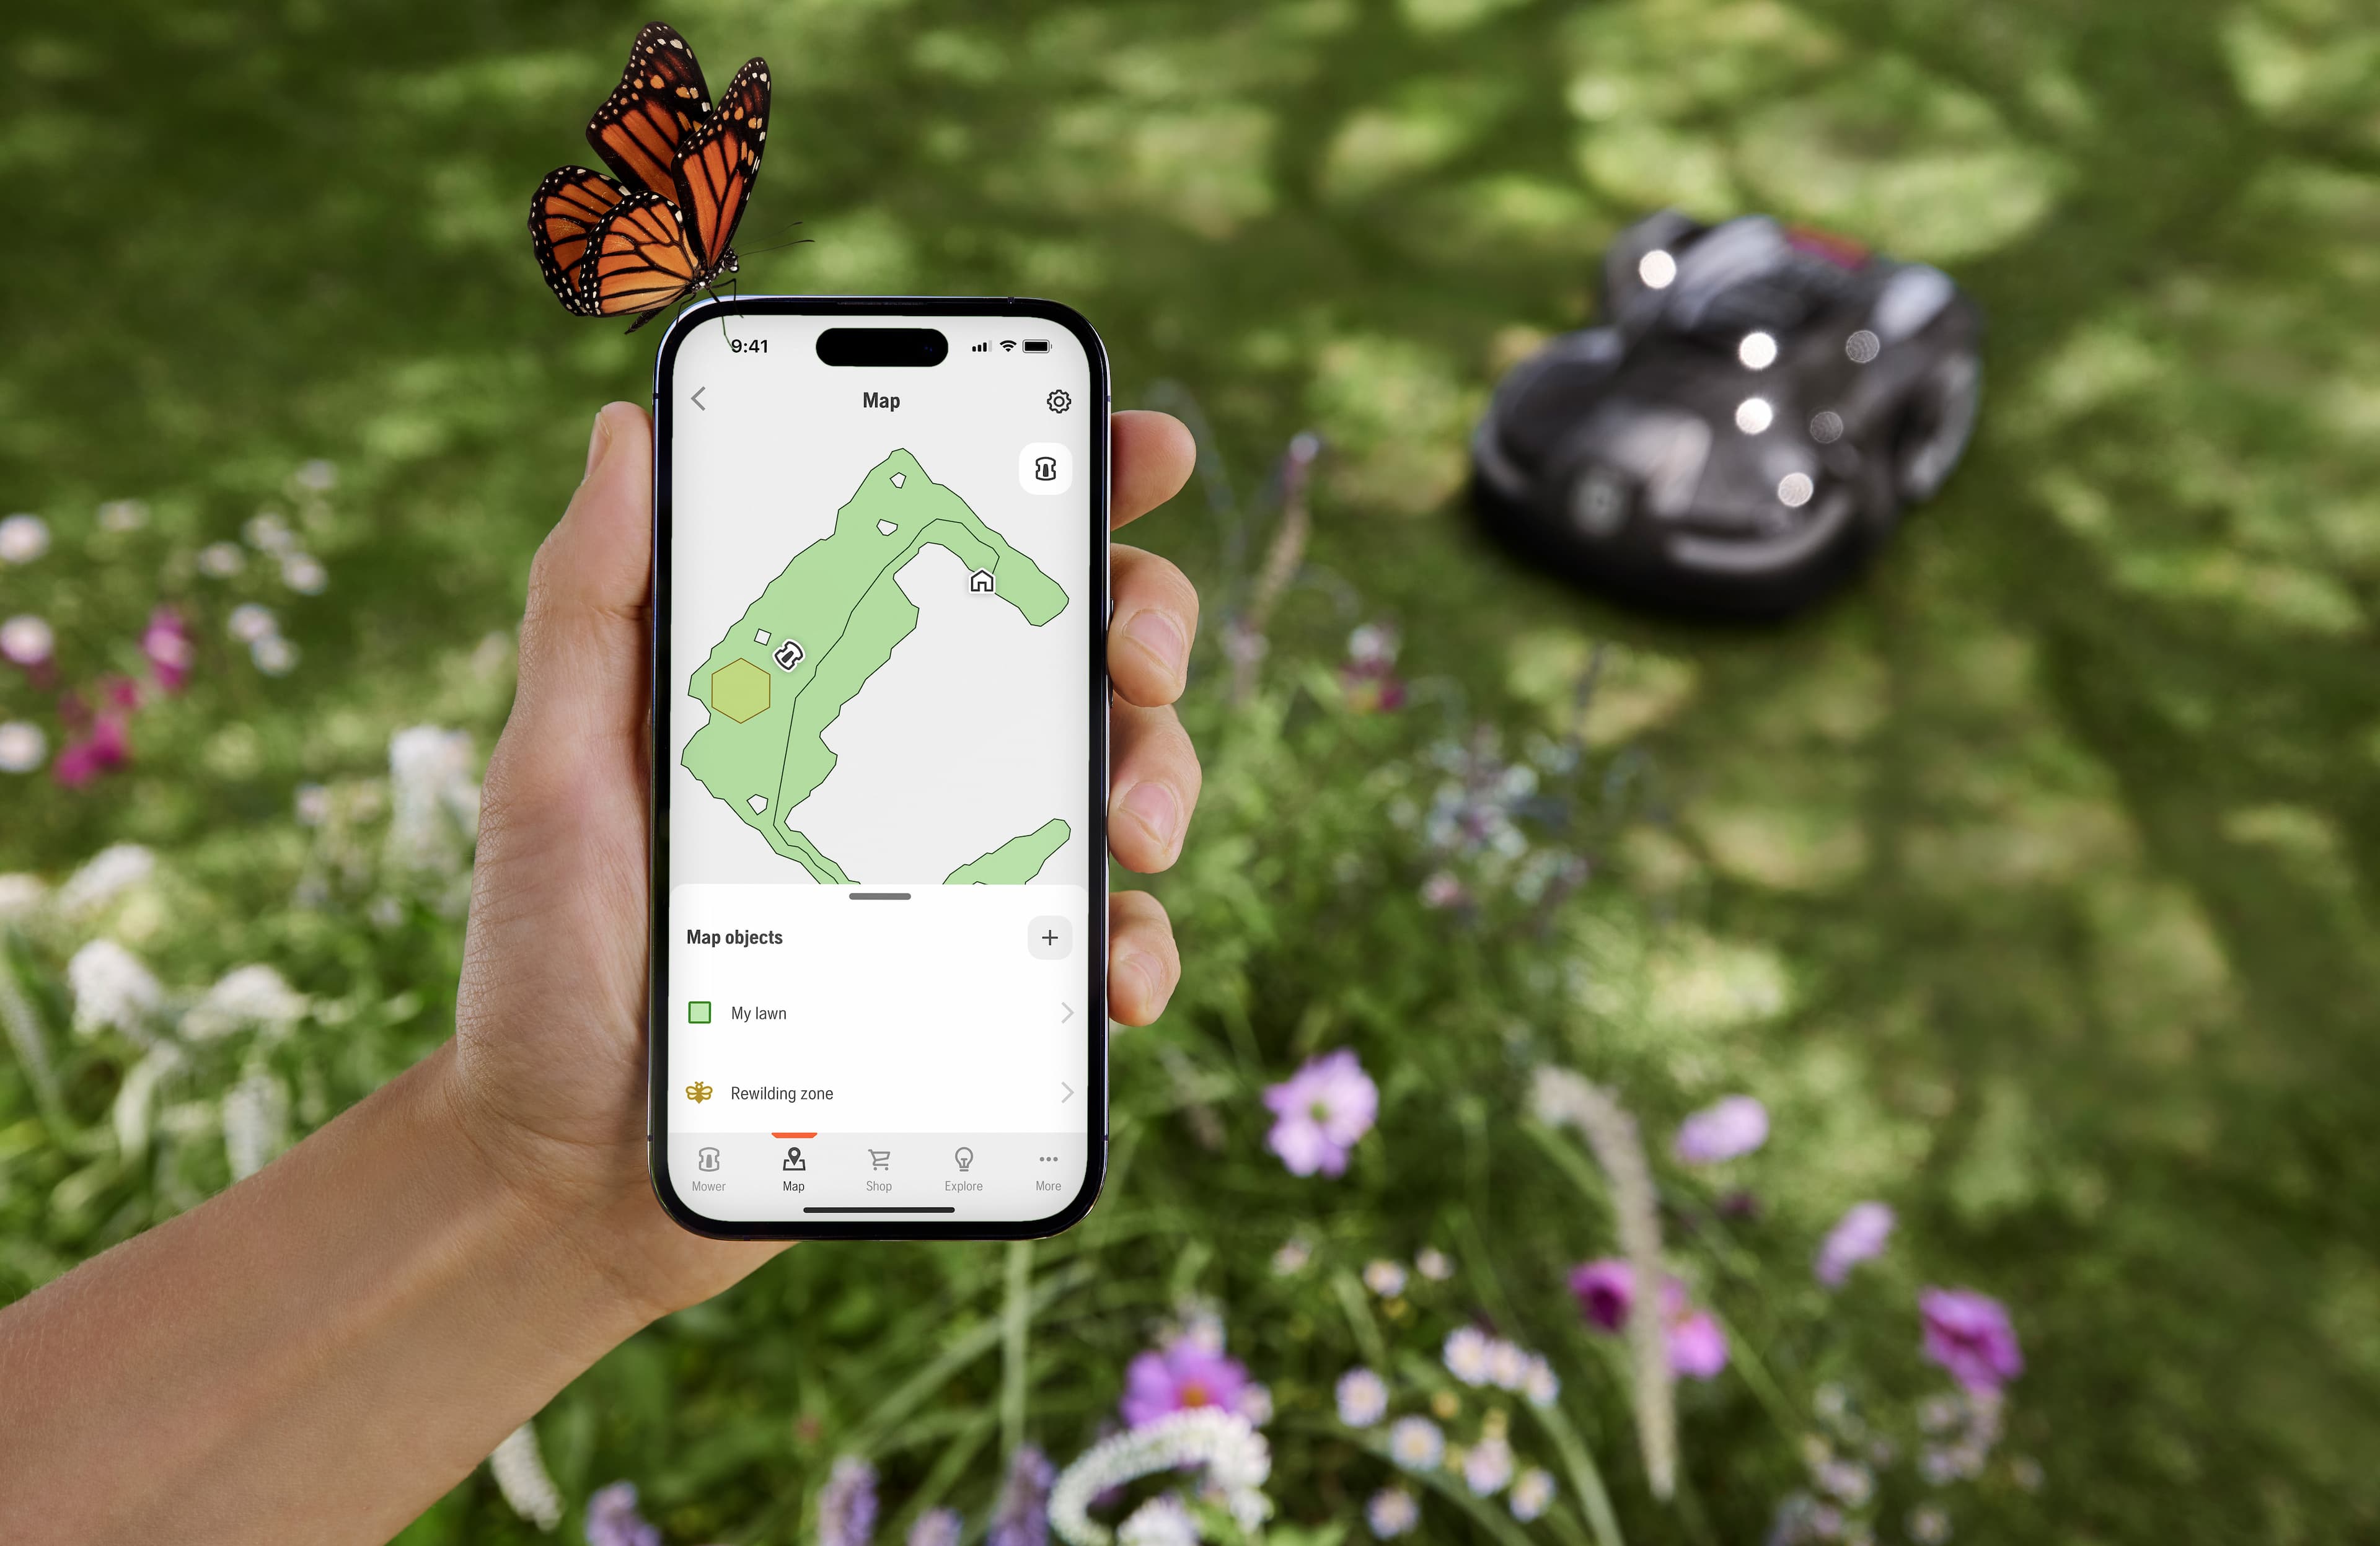 Image of smartphone with the map of the lawn showing full area and the area marked off to remain wild.